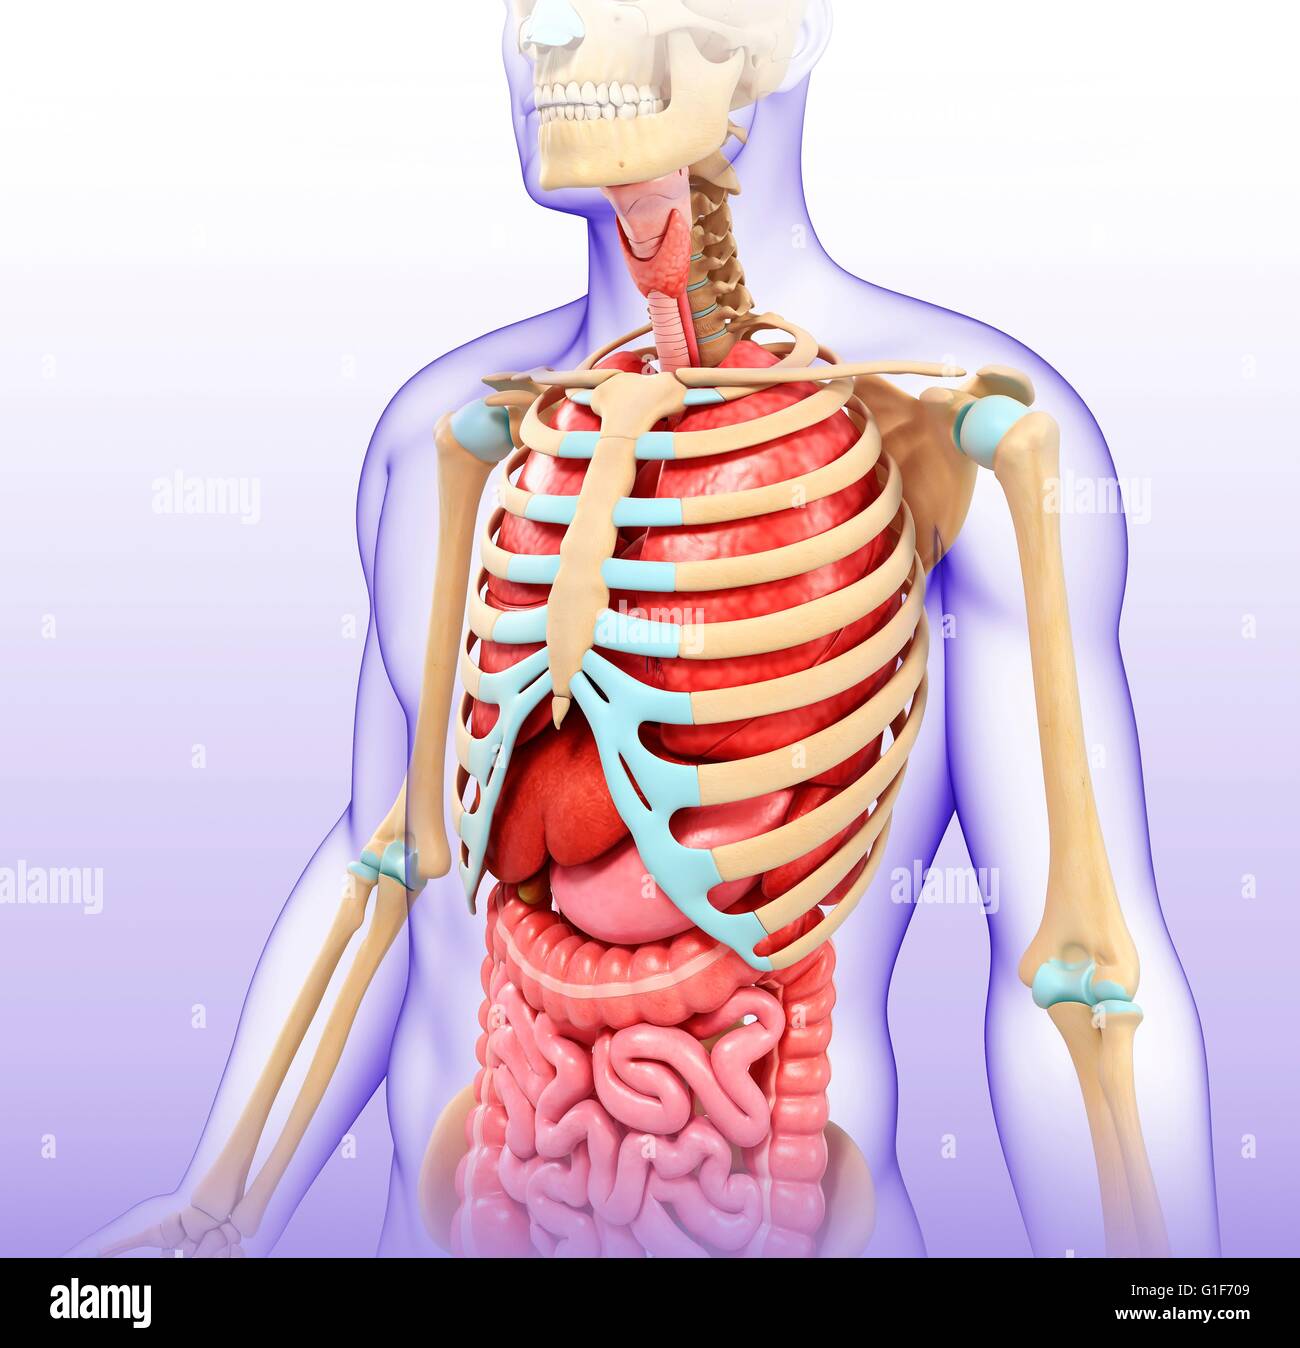 Illustration of female chest and body organs Stock Photo - Alamy